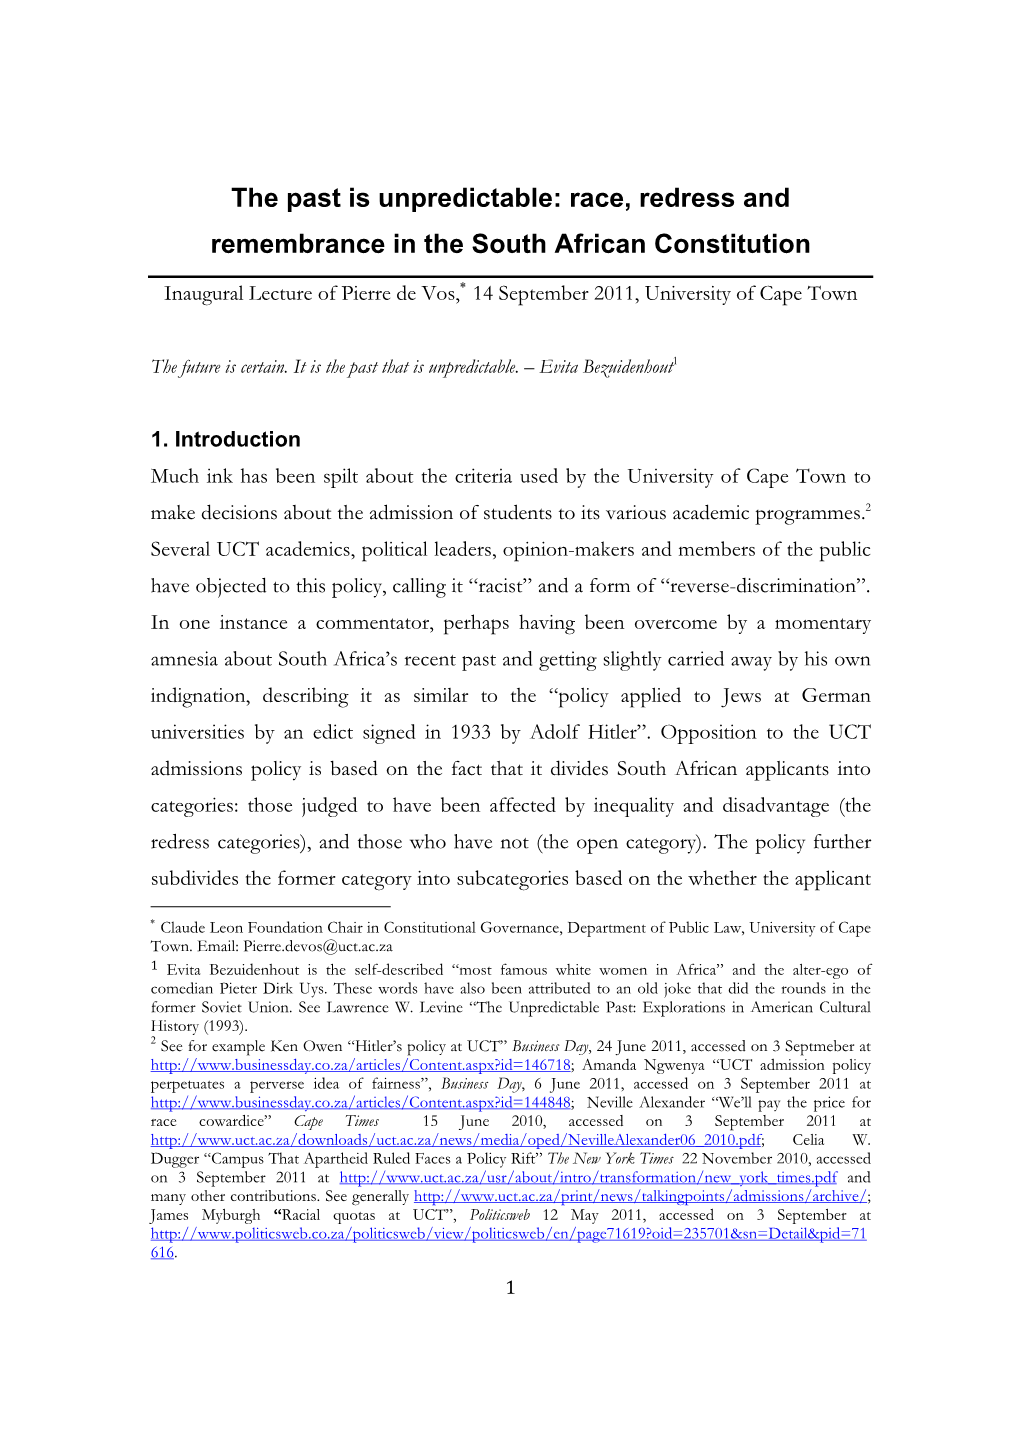 The Past Is Unpredictable: Race, Redress and Remembrance in the South African Constitution